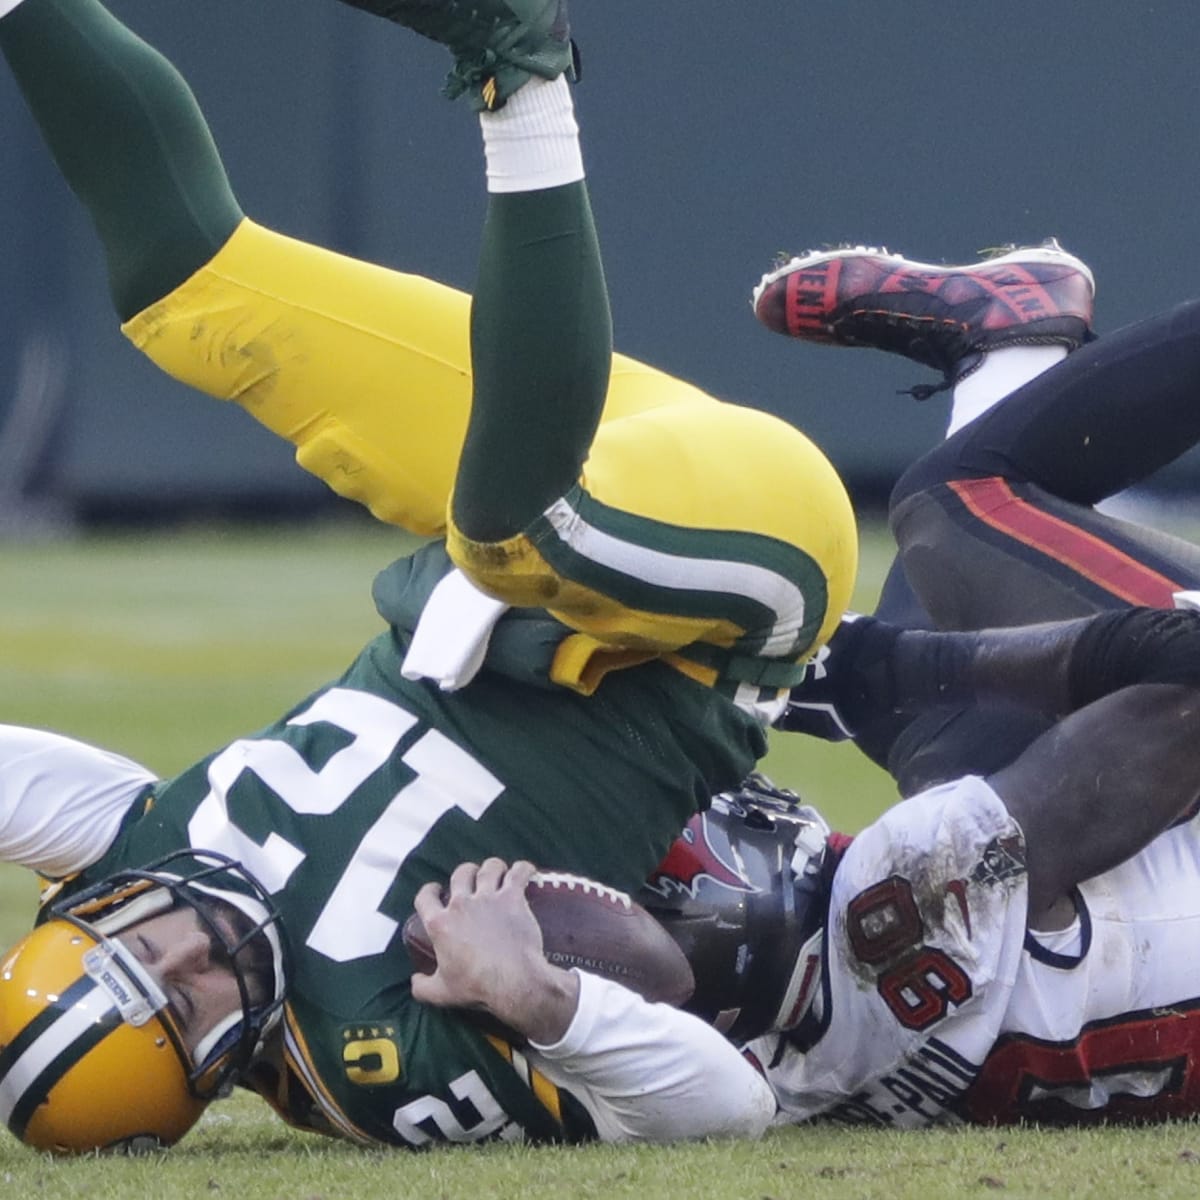 Green Bay Packers Lose to Tampa Bay Buccaneers in NFC Championship Game -  Sports Illustrated Green Bay Packers News, Analysis and More